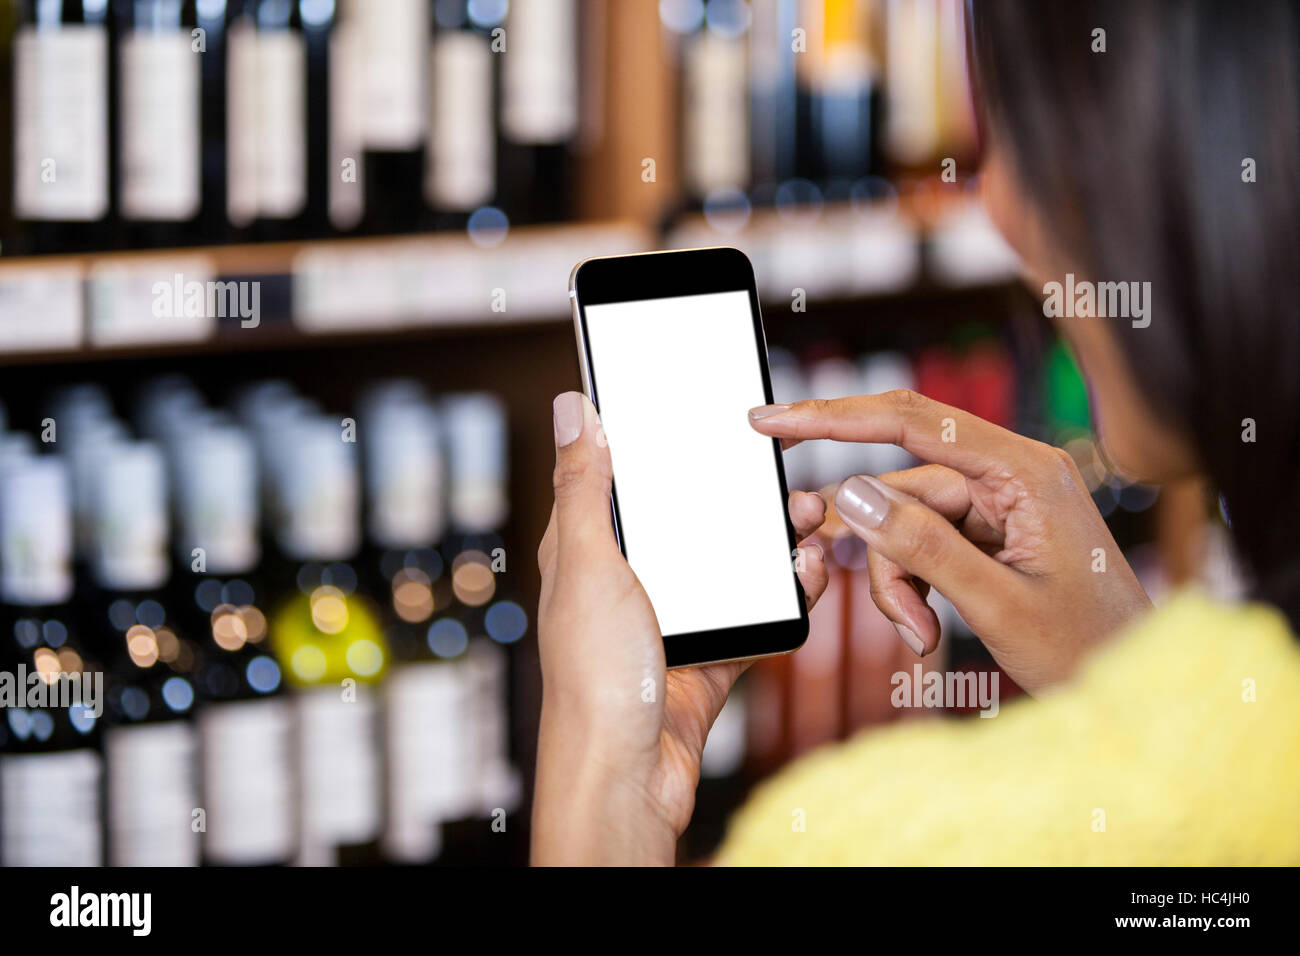 Woman using mobile phone in grocery section Stock Photo